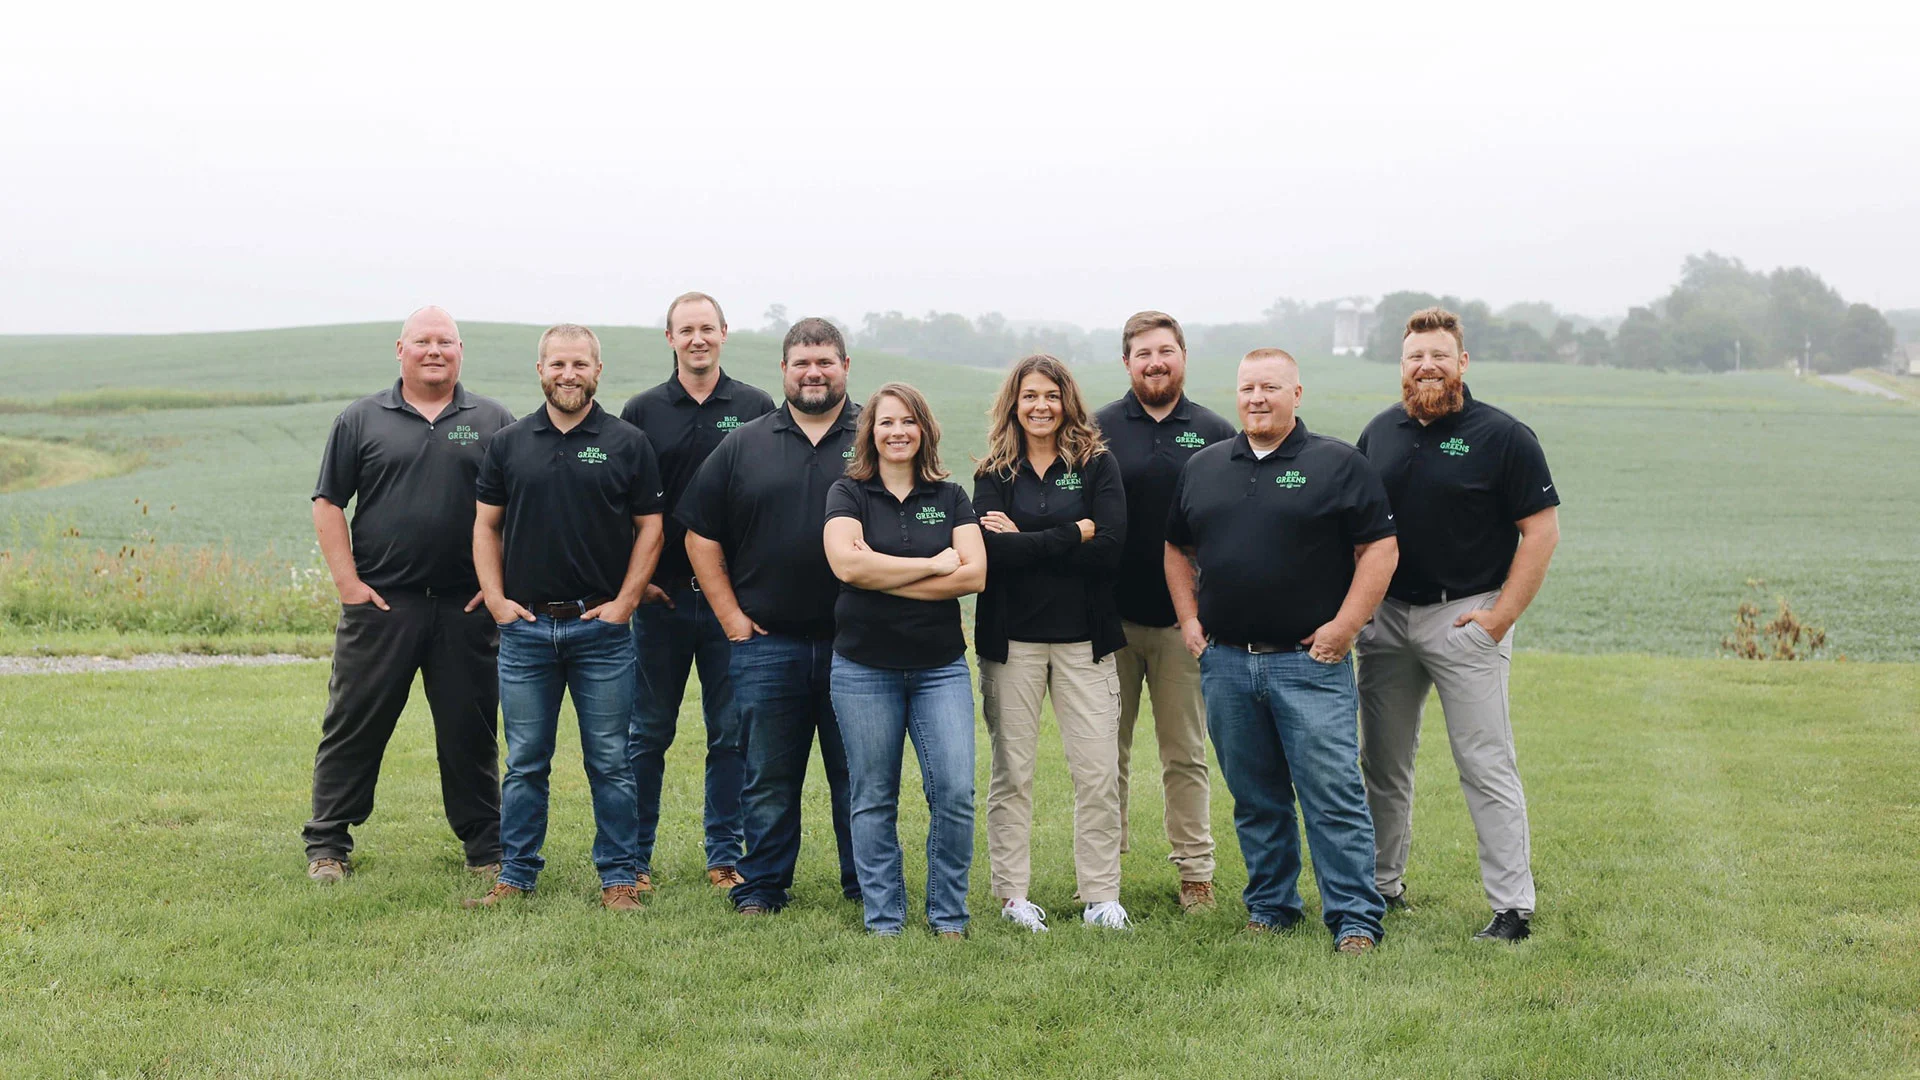 Big Greens team standing in a field in Ohio.